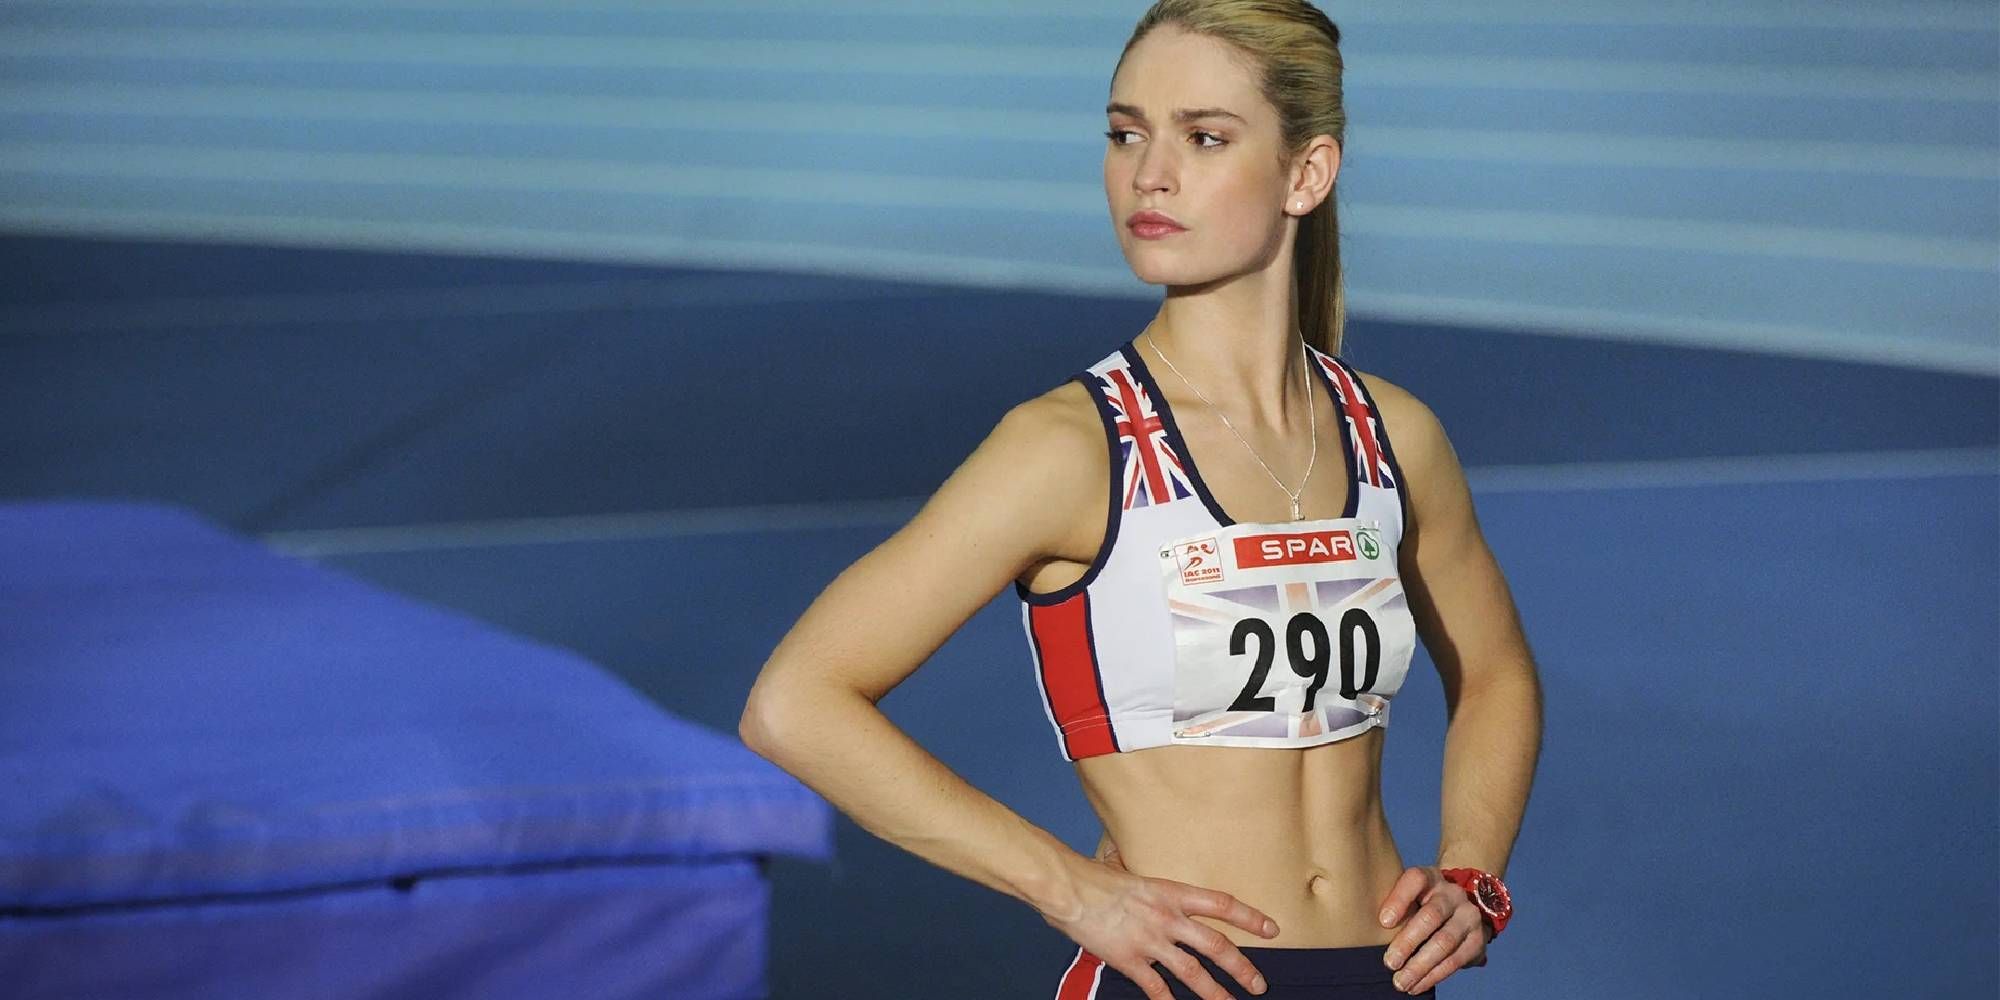 Lily James as Lisa Temple, standing in her running uniform with her hands on her hips in Fast Girls